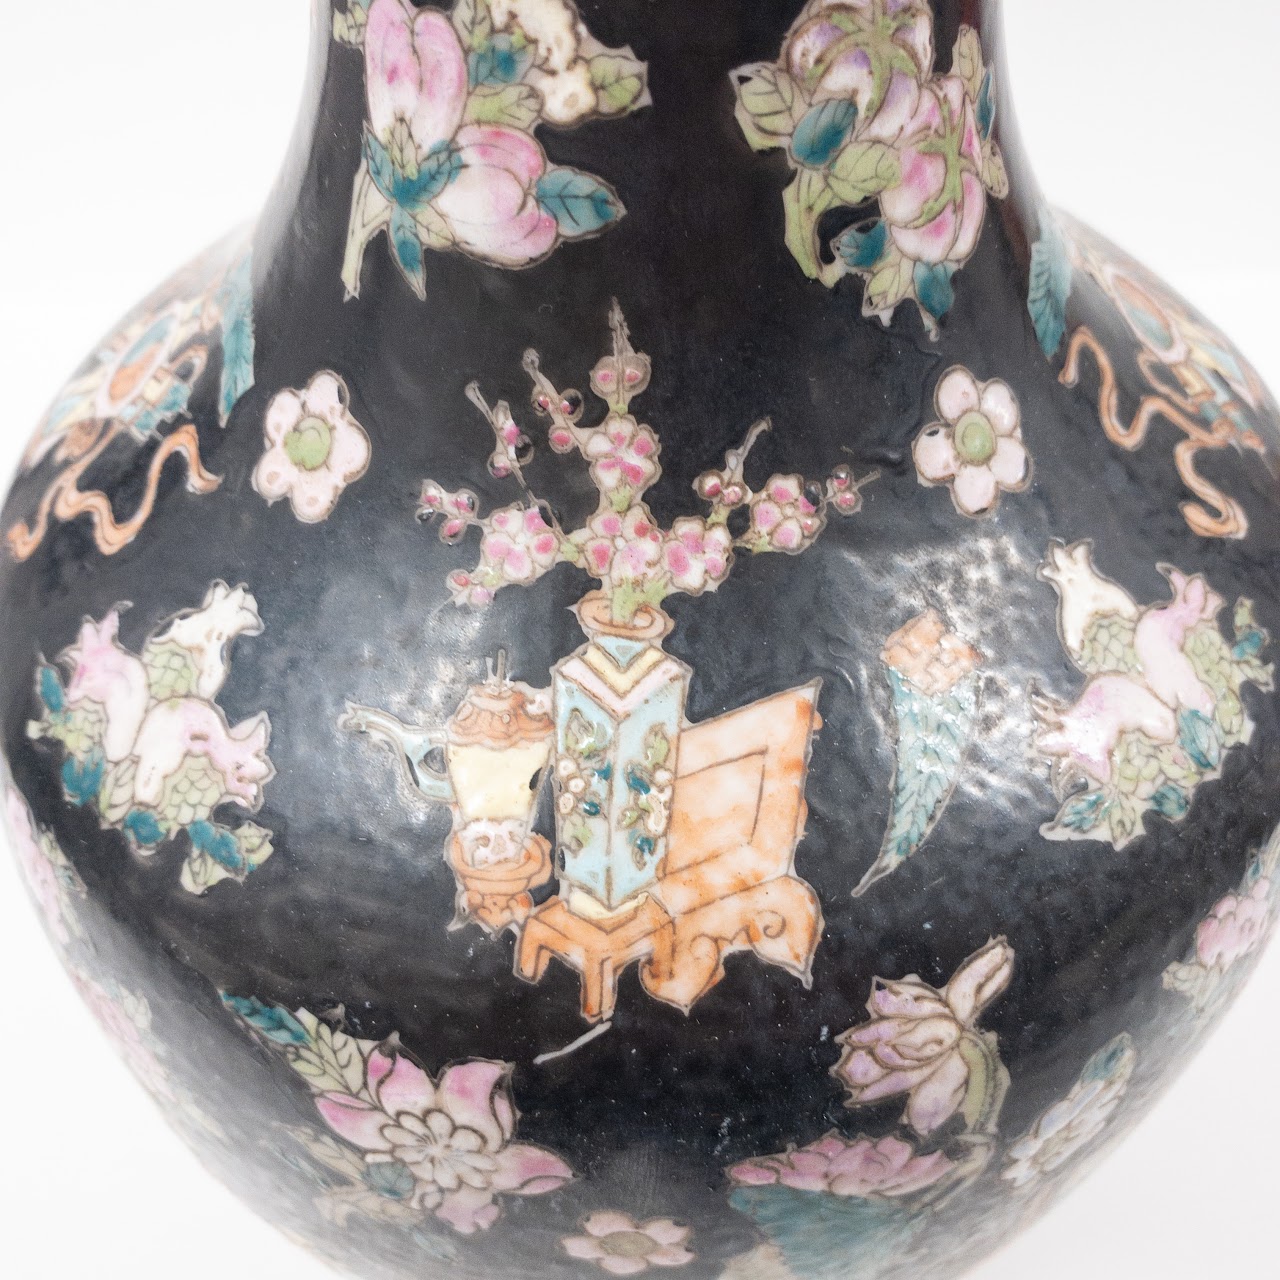 Chinese Black and Floral Ceramic Vase